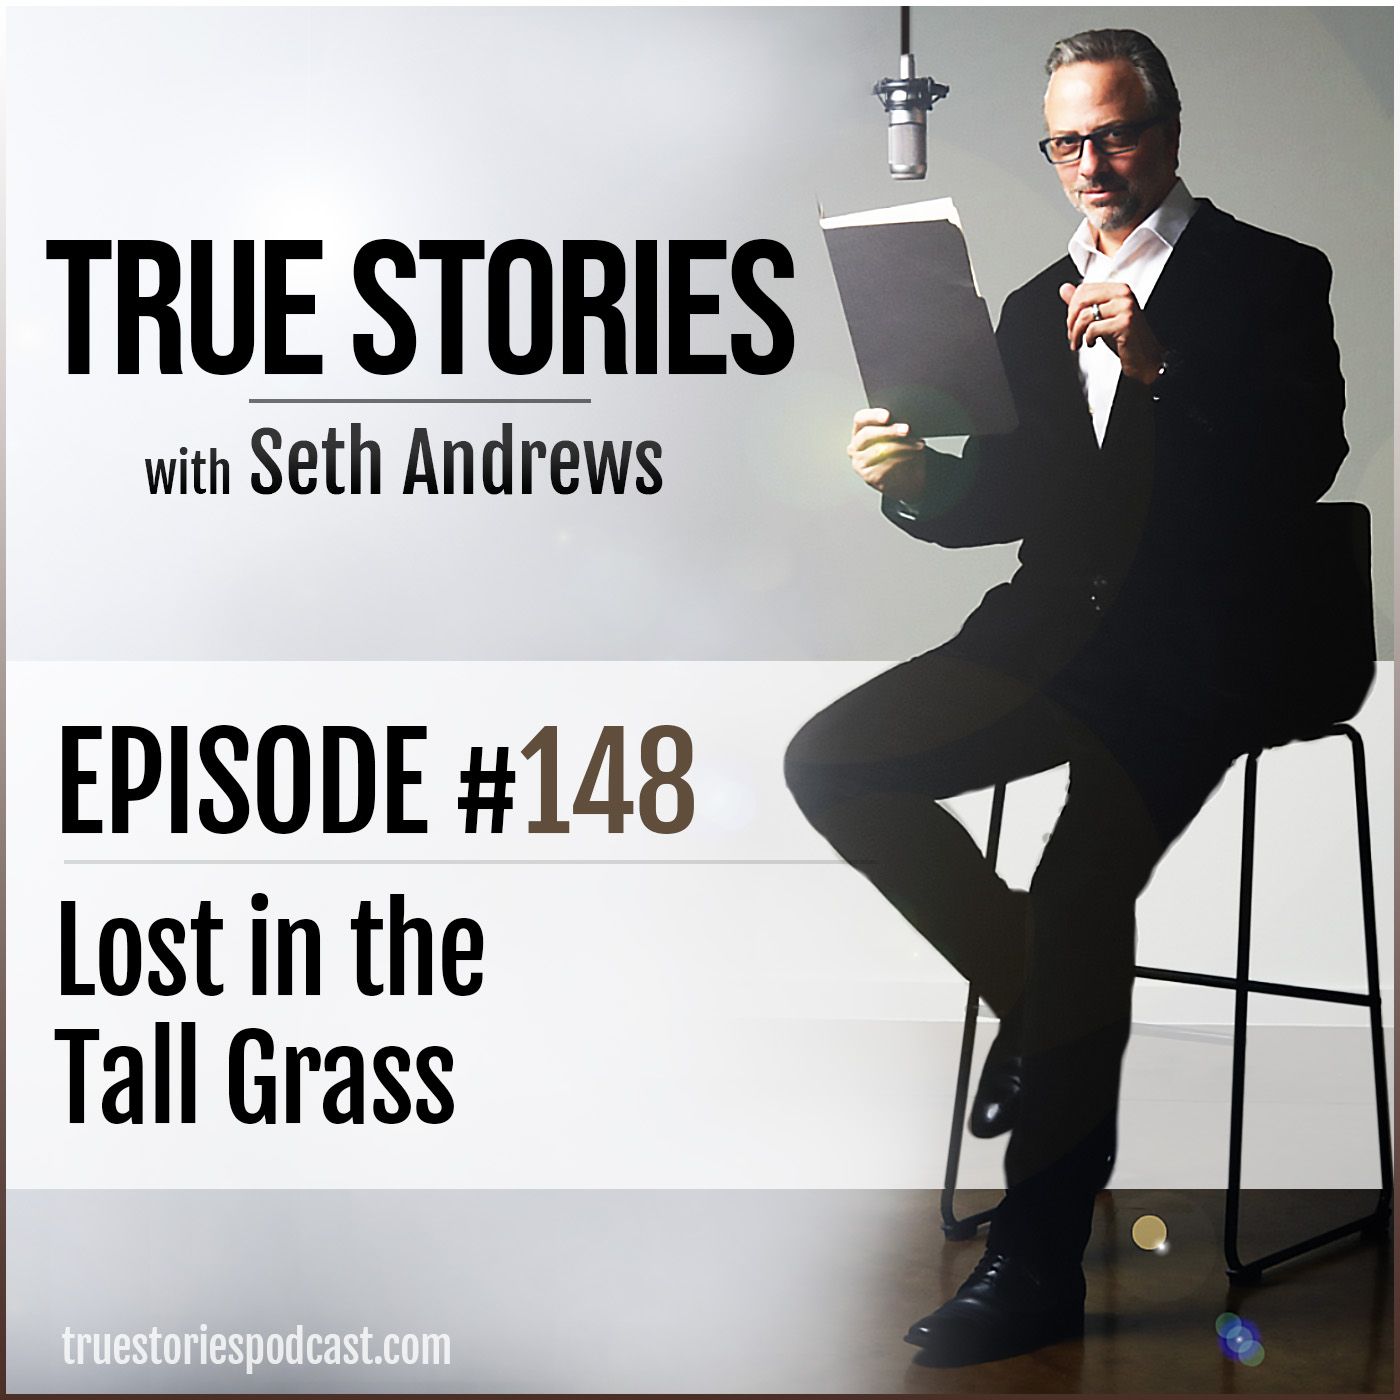 True Stories #148 - Lost in the Tall Grass